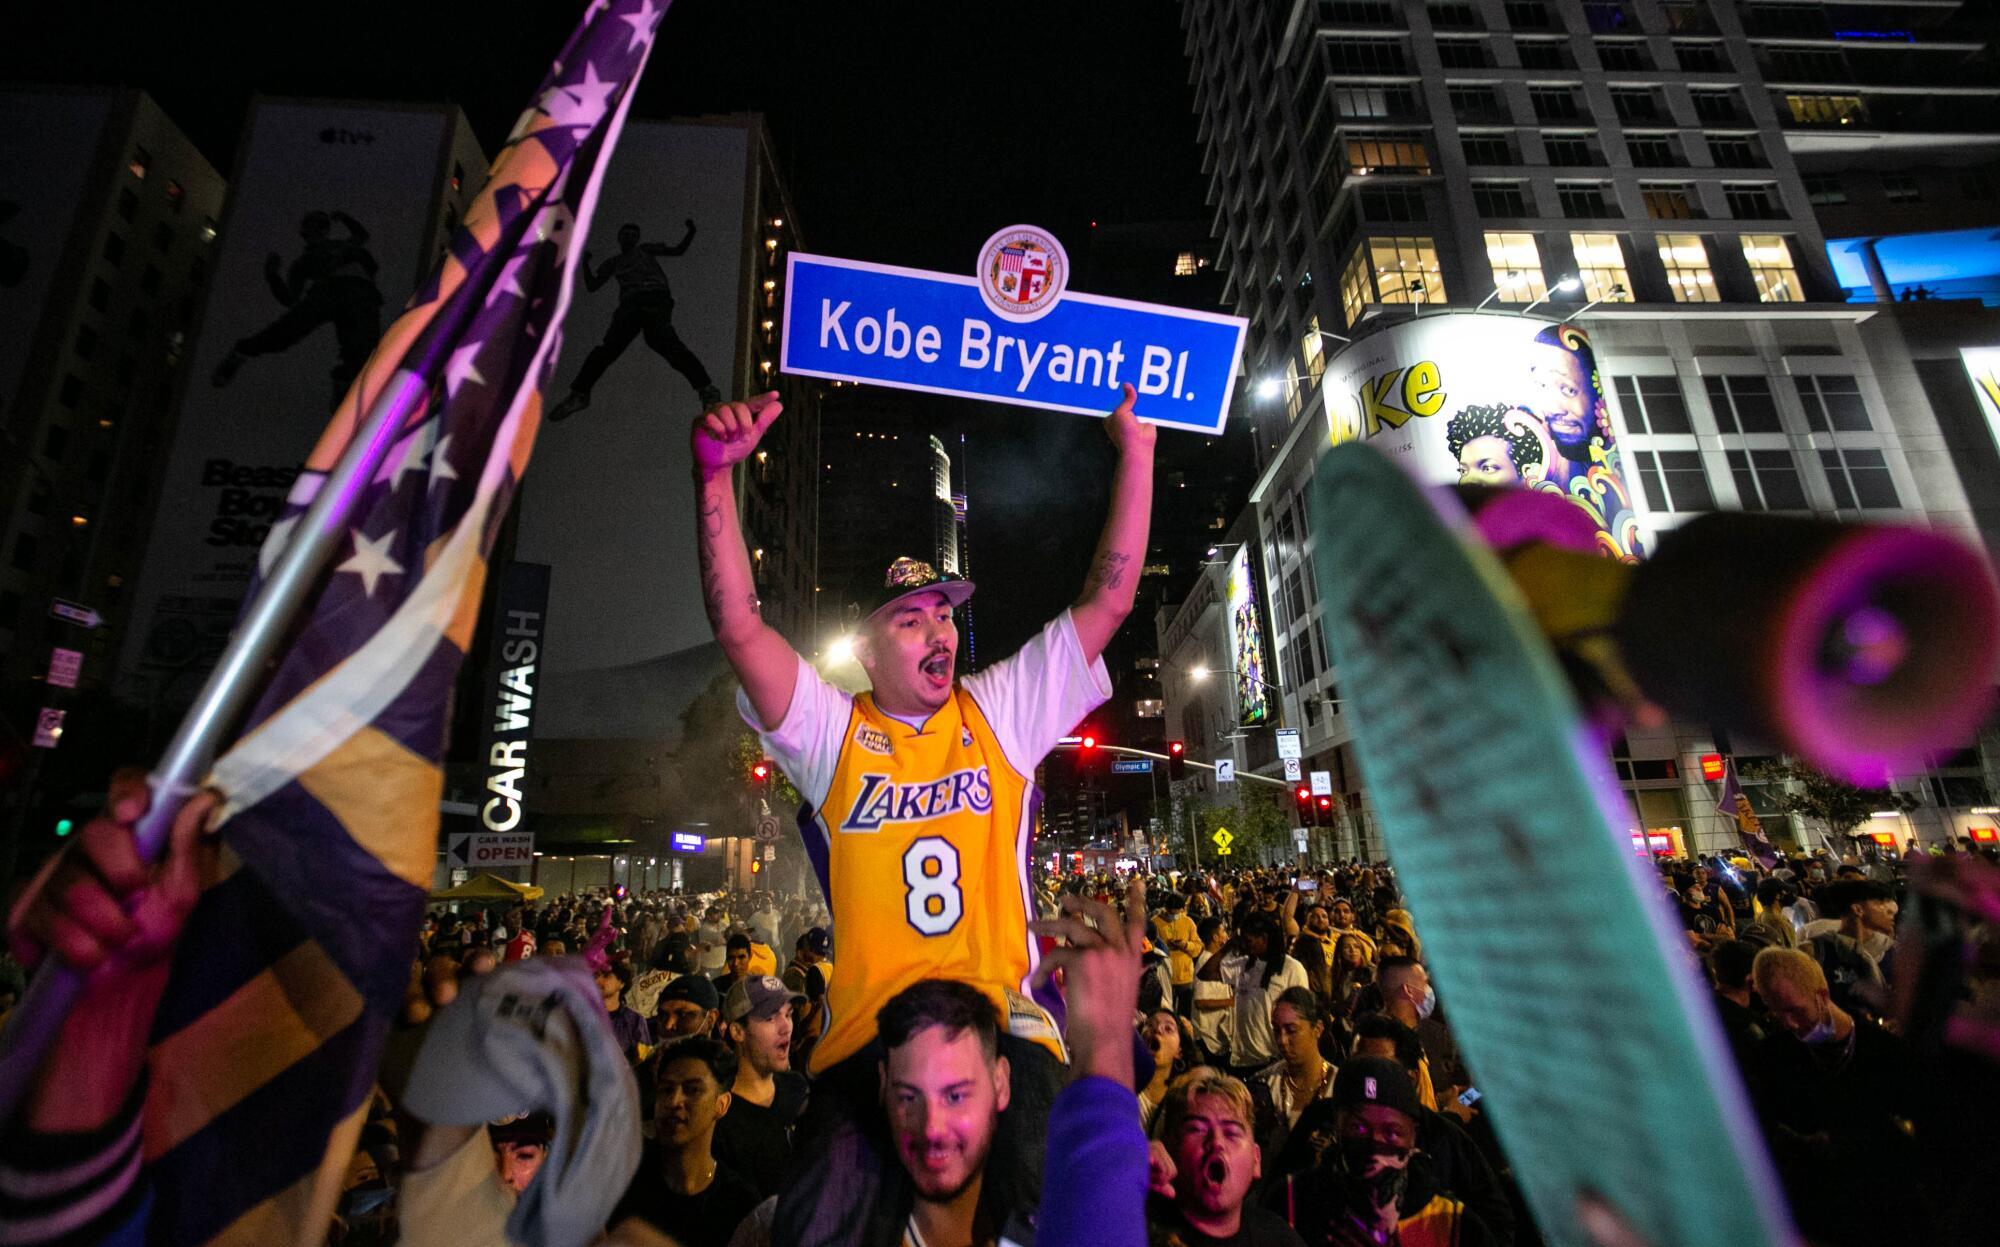 Amid a throng of people, a man seated on another man's shoulders holds a Kobe Bryant Boulevard sign.